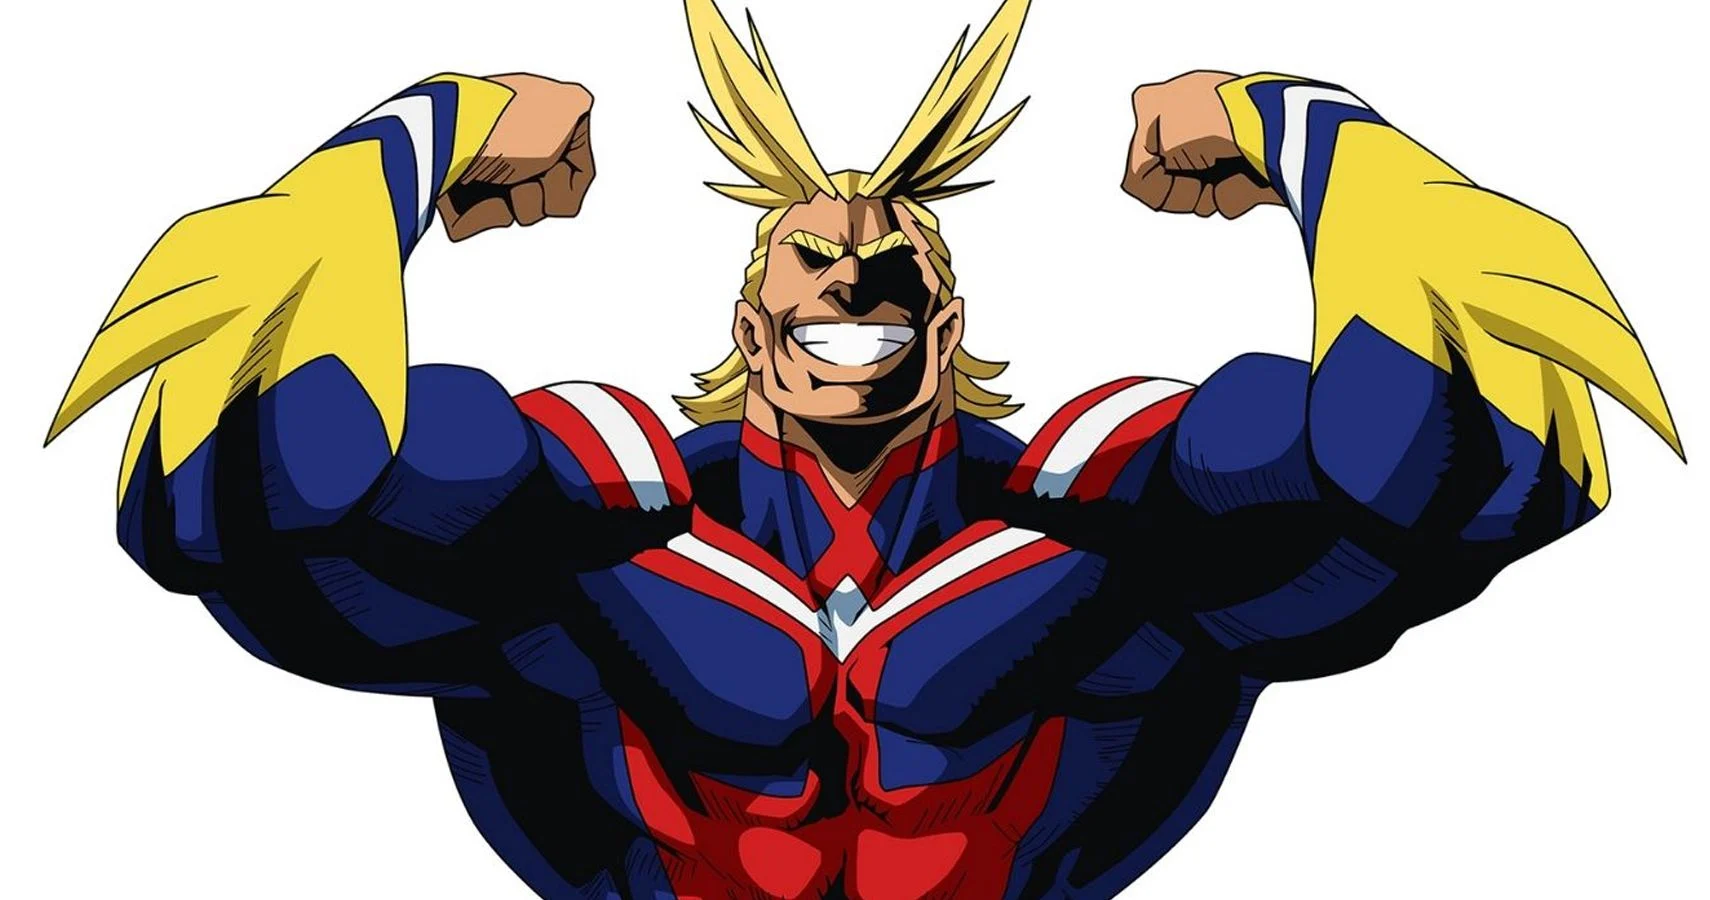 Inspirational anime quotes: All Might (My Hero Academia)